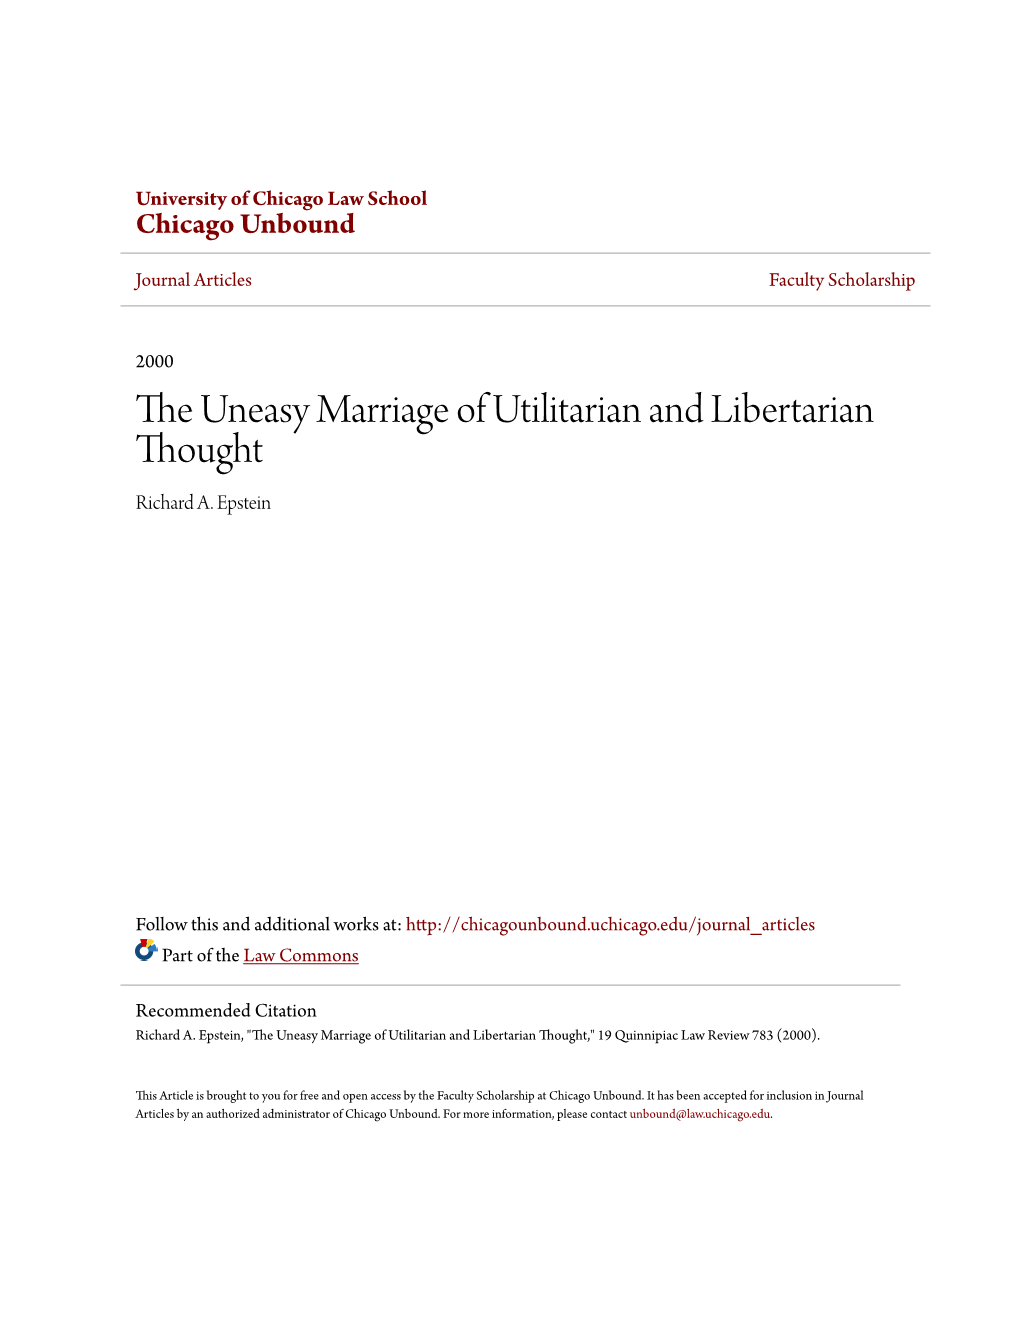 The Uneasy Marriage of Utilitarian and Libertarian Thought